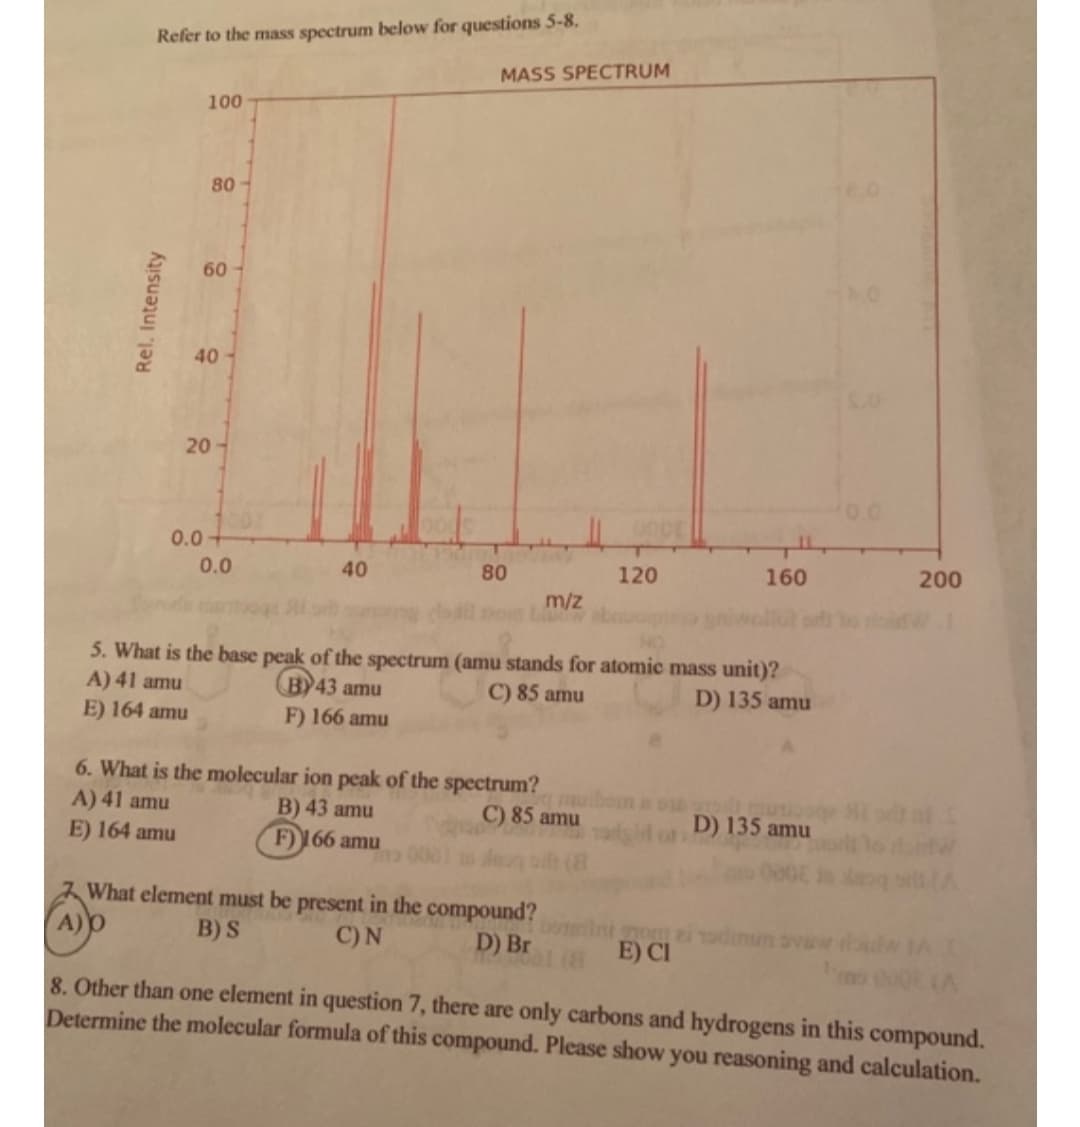 Refer to the mass spectrum below for questions 5-8.
MASS SPECTRUM
100
80-
60
40-
20
0.0+
0.0
40
80
120
160
200
m/z
Tom L
5. What is the base peak of the spectrum (amu stands for atomic mass unit)?
A) 41 amu
B)43 amu
F) 166 amu
C) 85 amu
D) 135 amu
E) 164 amu
6. What is the molecular ion peak of the spectrum?
A) 41 amu
E) 164 amu
B) 43 amu
C) 85 amu
D) 135 amu
F) 166 amu
What element must be present in the compound?
om ei admun avaw
E) CI
B) S
C)N
D) Br
8. Other than one element in question 7, there are only carbons and hydrogens in this compound.
Determine the molecular formula of this compound. Please show you reasoning and calculation.
Rel. Intensity
